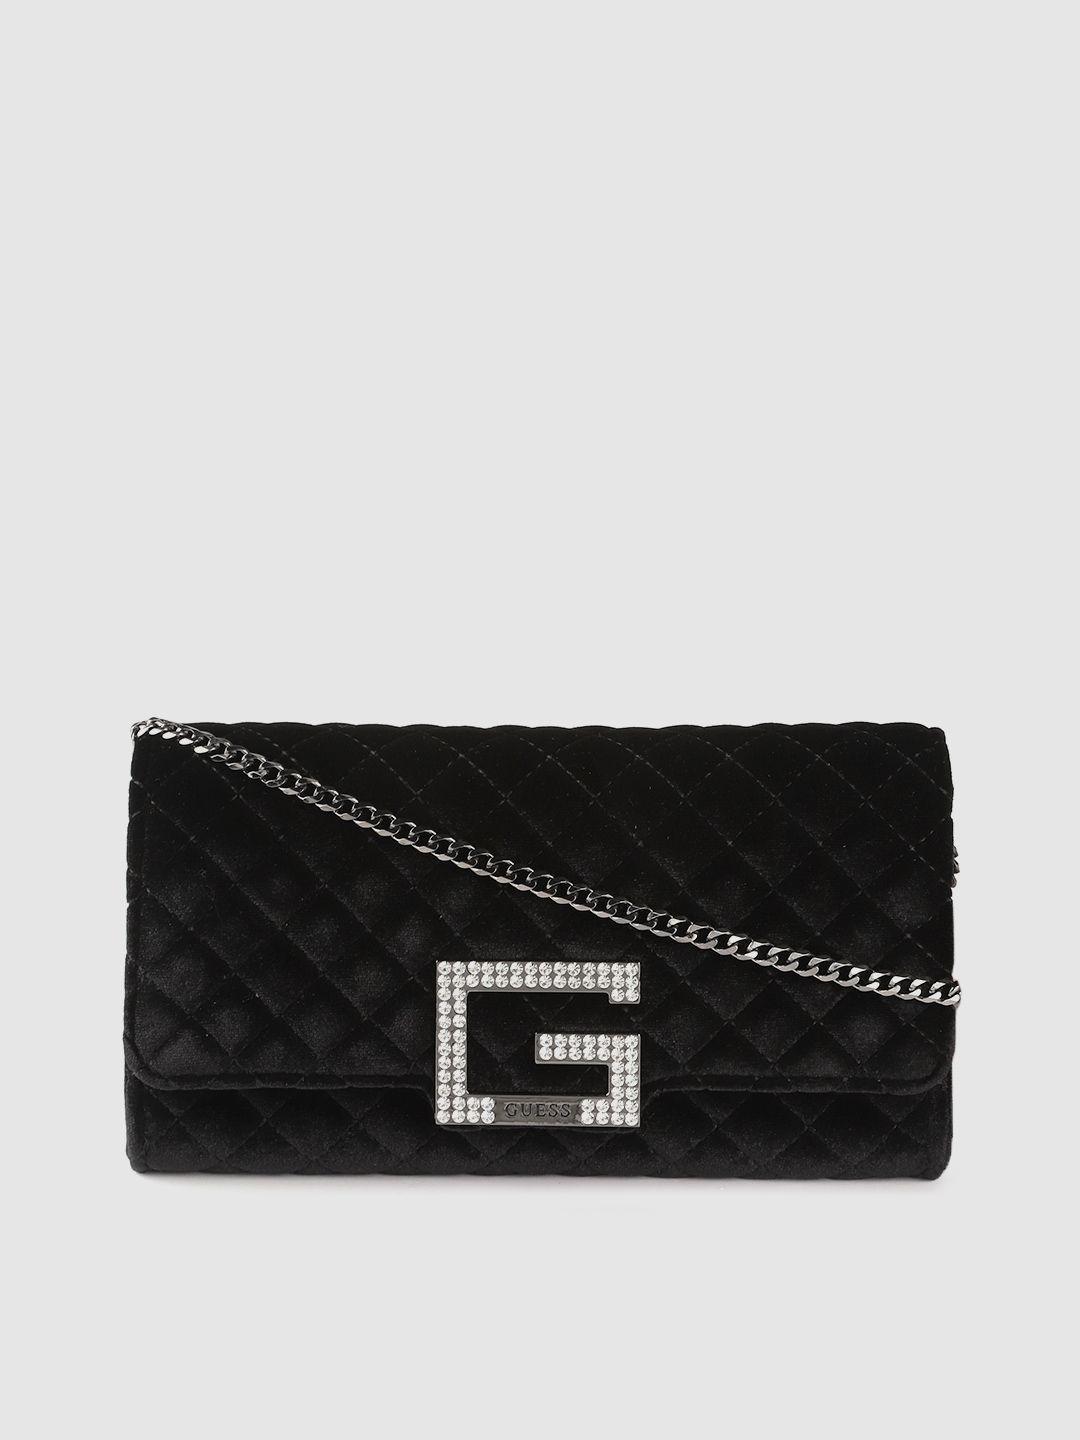 guess black quilted velvet finish clutch with detachable sling strap